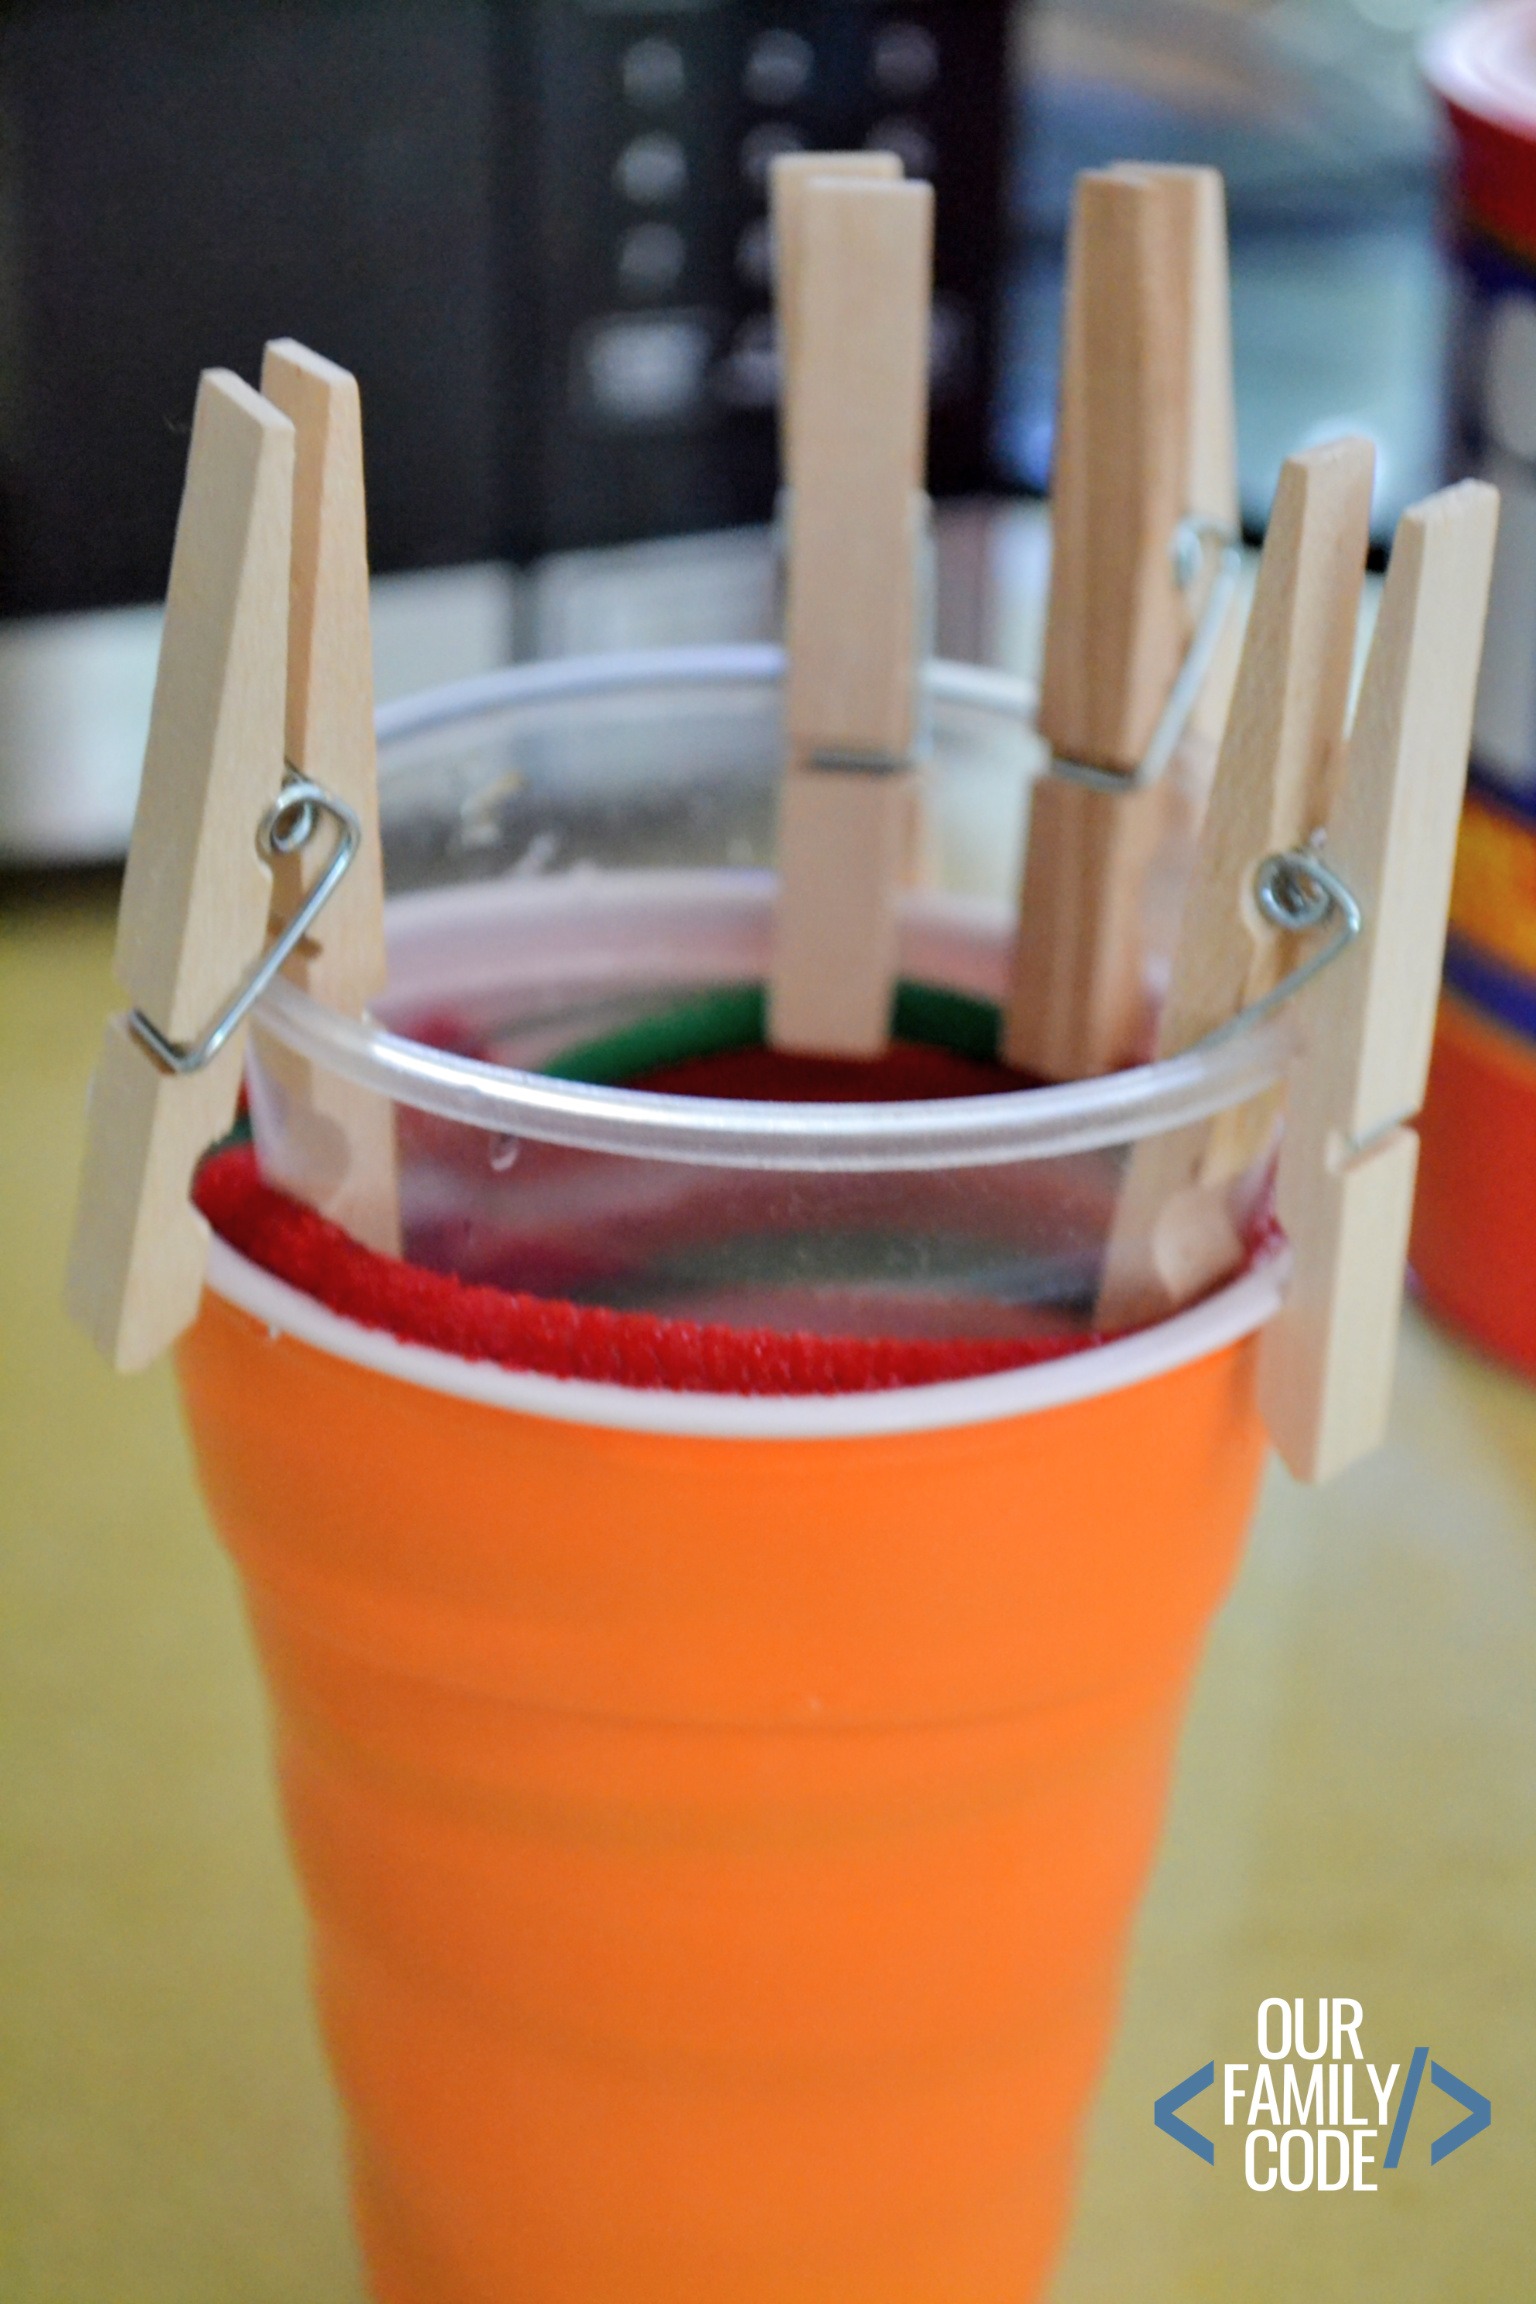 A picture of how to make an ice lantern using clips to hold a cup in place in freezer.